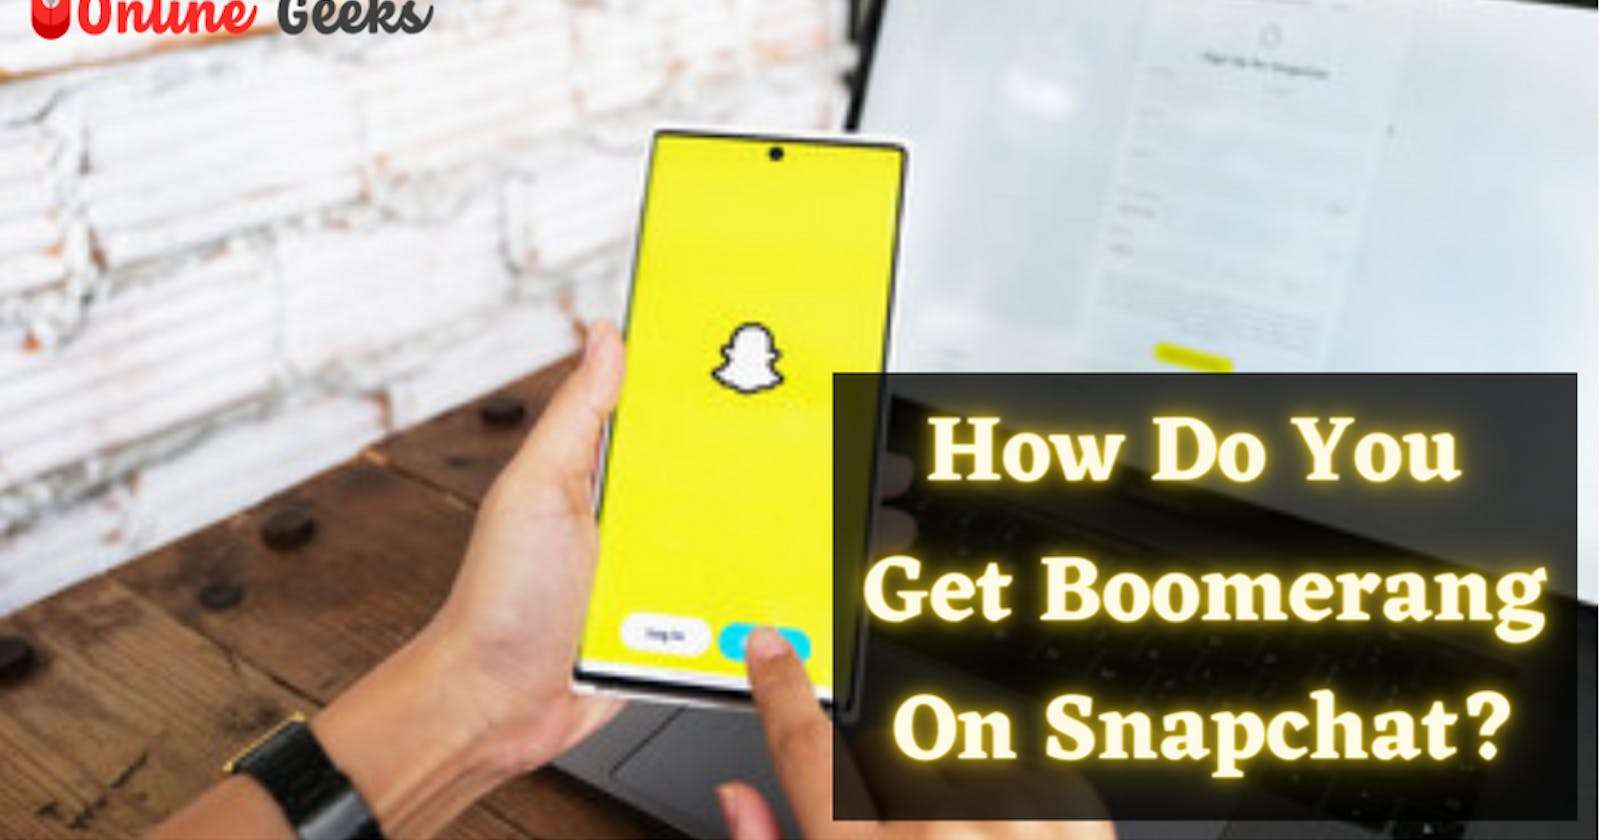 How Do You Get Boomerang On Snapchat?